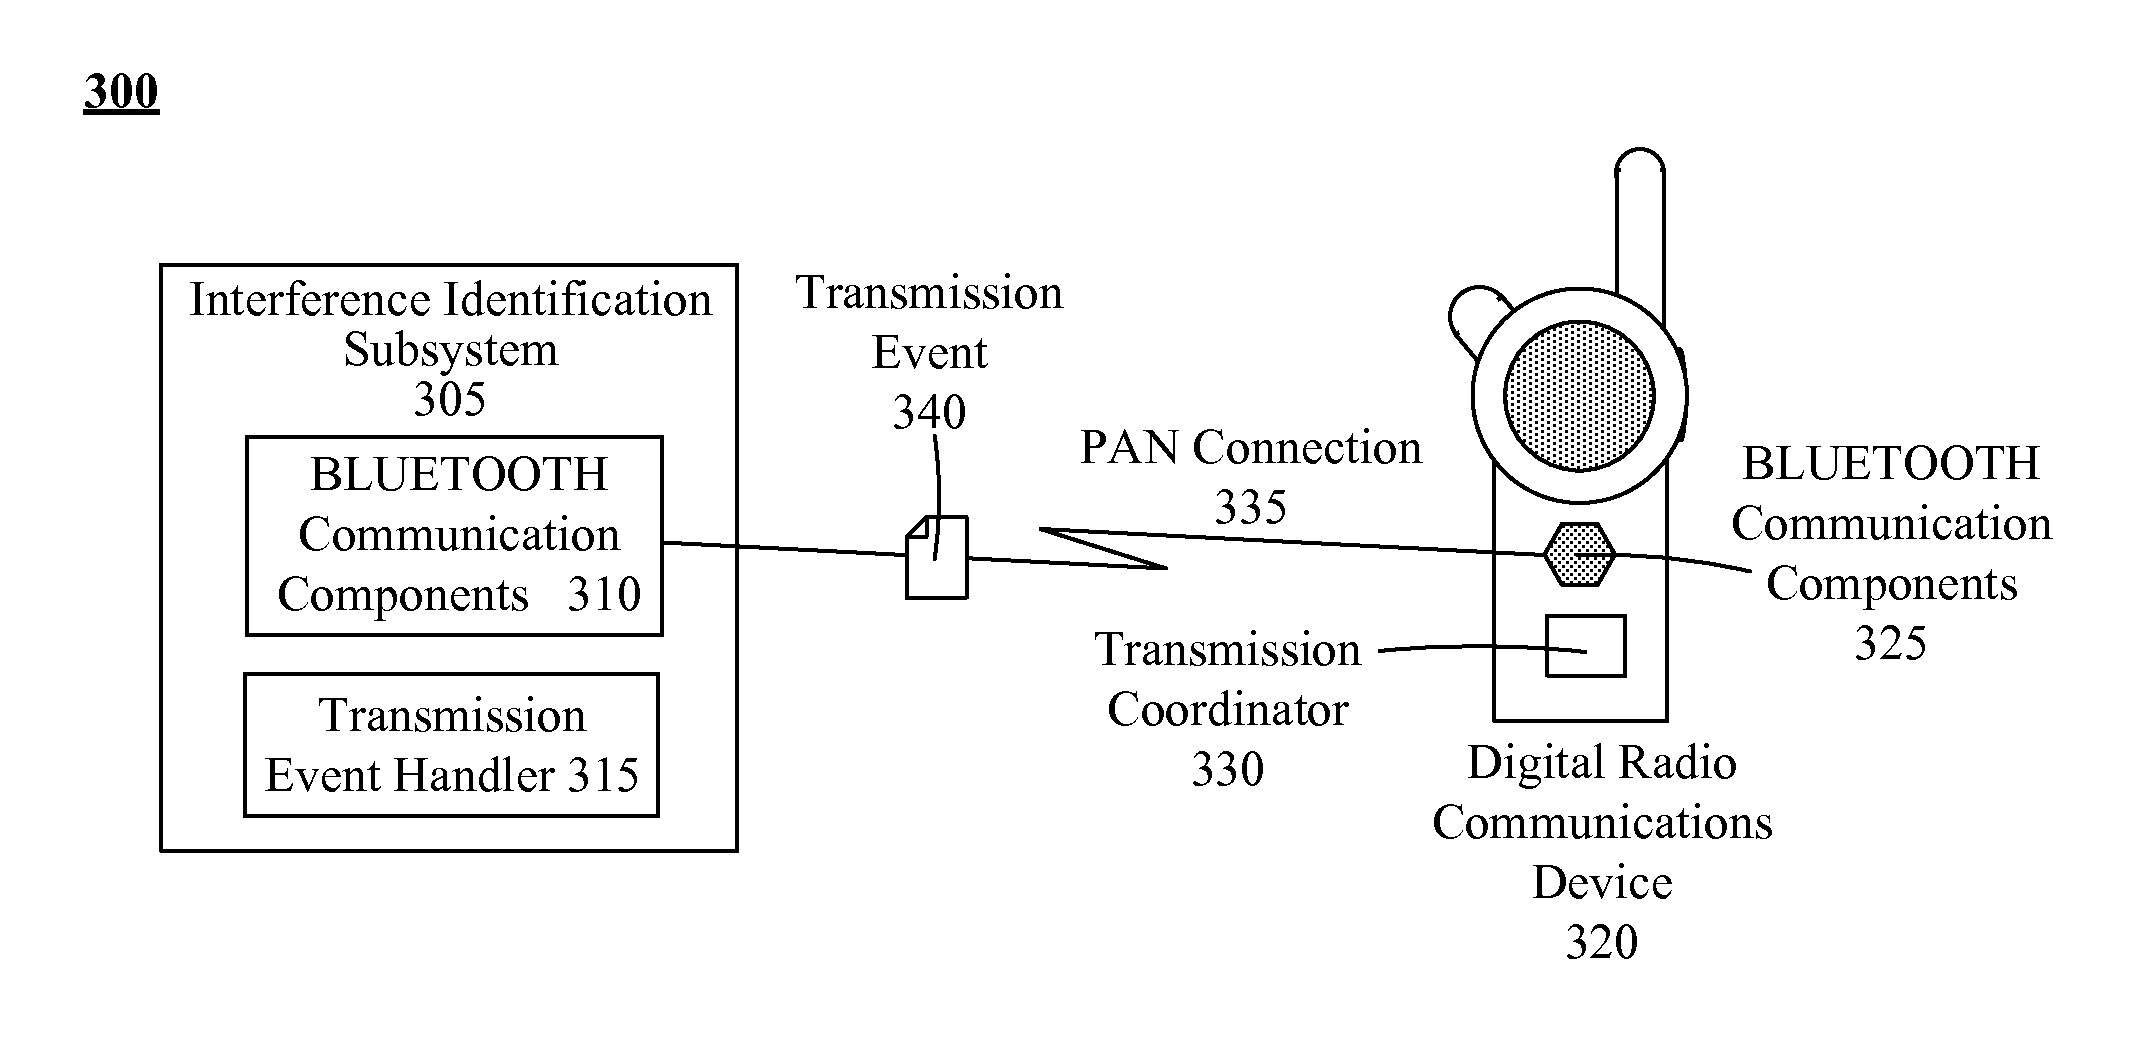 Mitigating transmission interference between digital radio and broadband communication devices